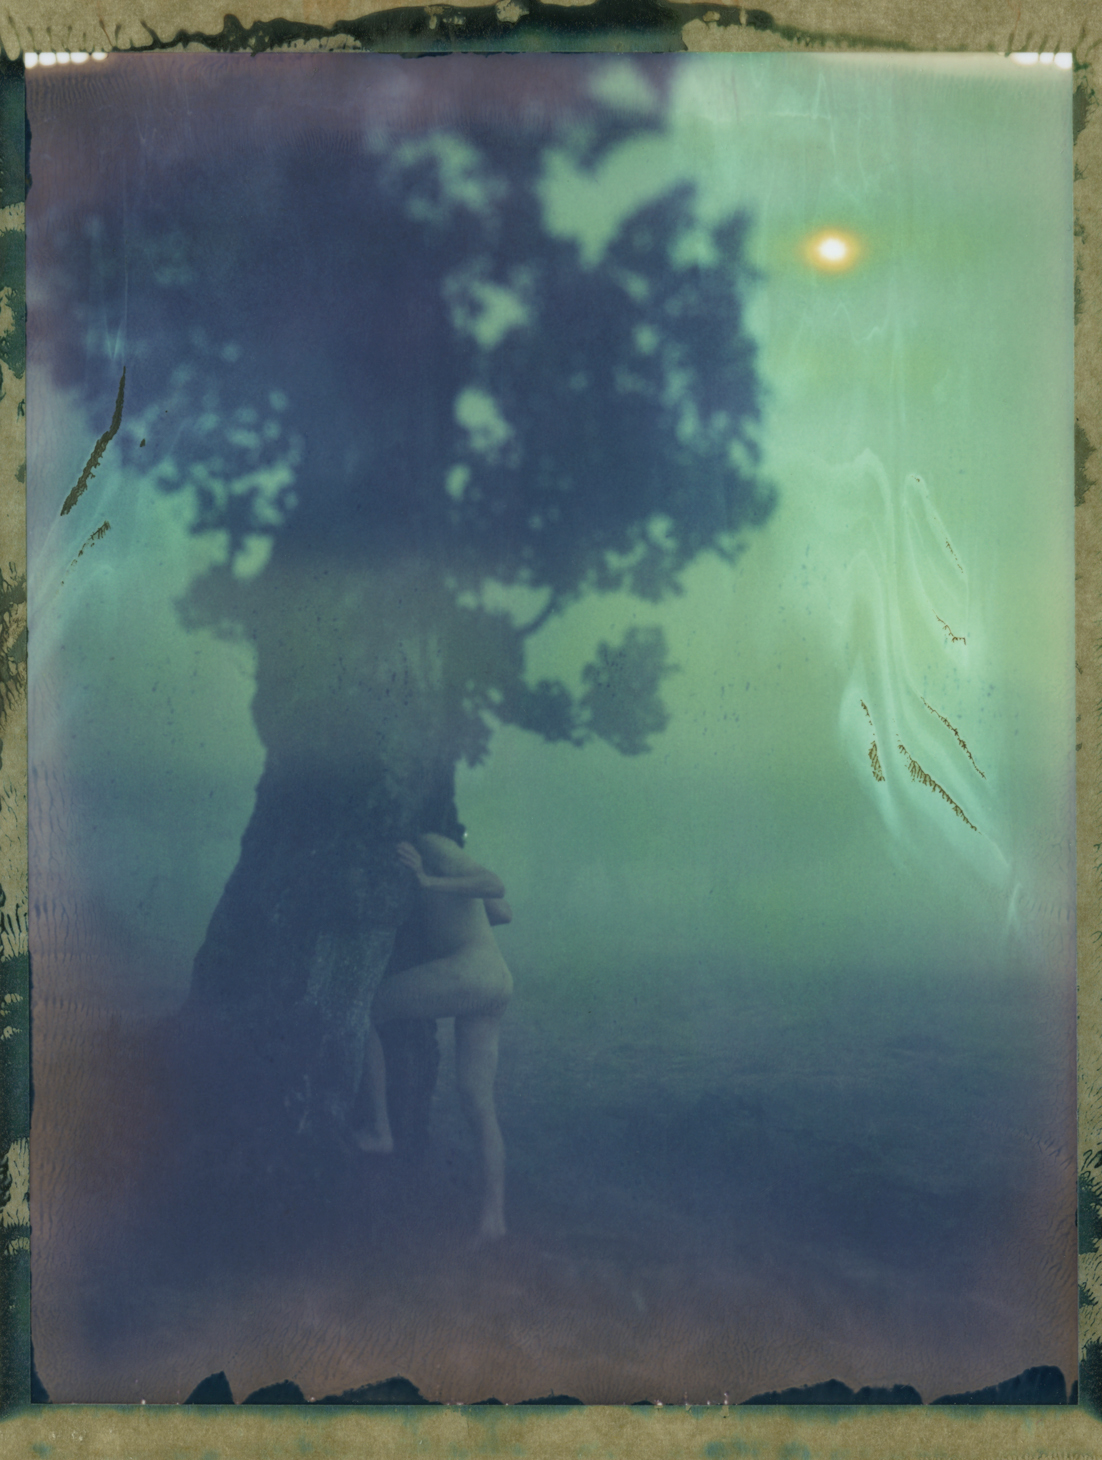 bastiank POLAROID instant large format 4x5 sheet film 59 color film wista field woods calling Nature foggy mystical Entrance life human being